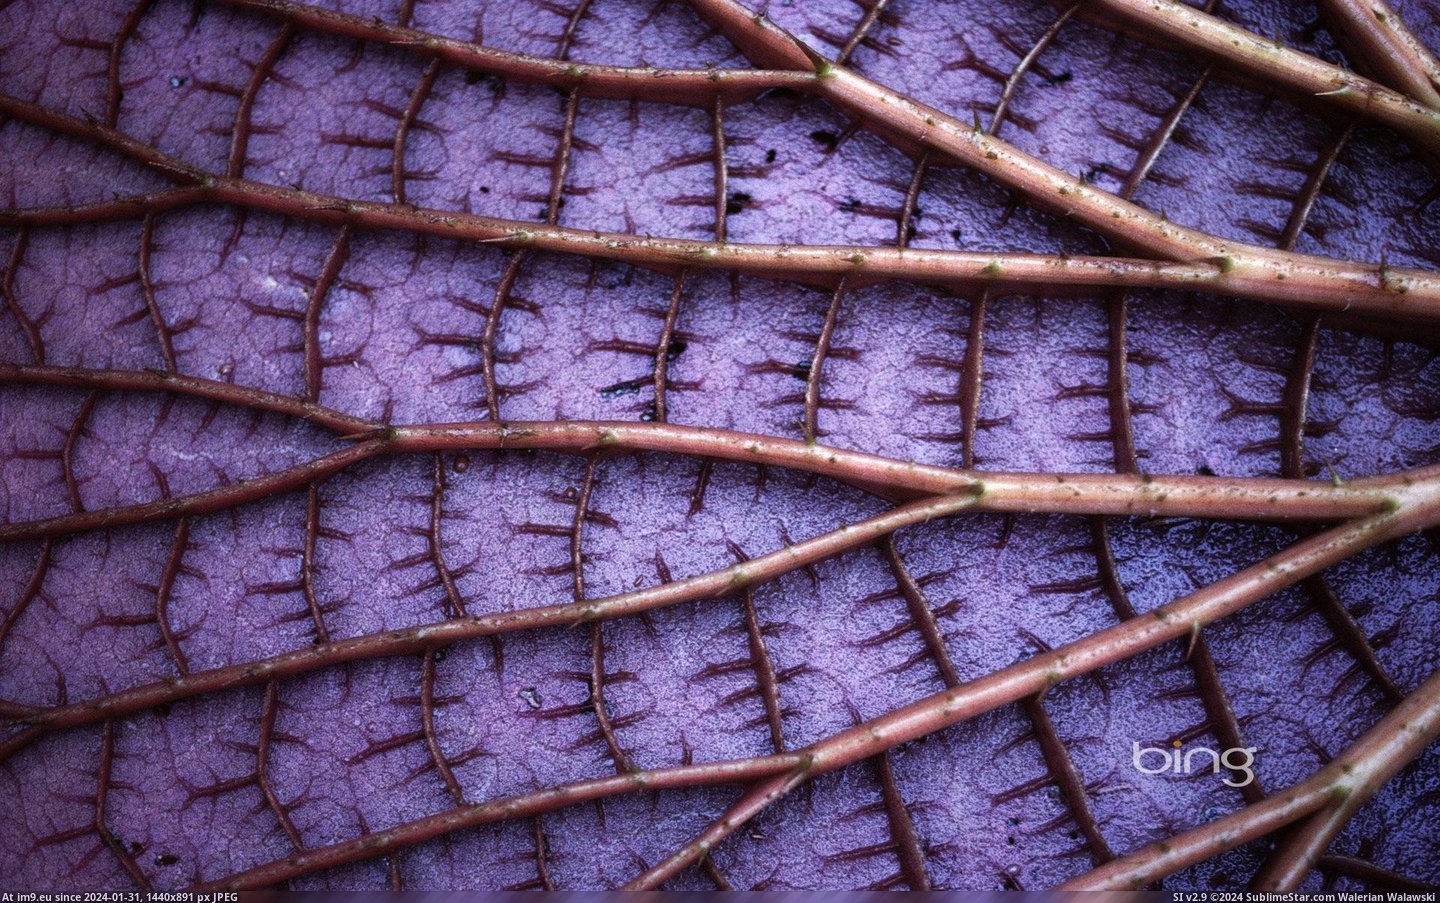 Detail of the underside of a giant Amazon water lily, Amazonas State, Brazil (© Getty Images) (in Best photos of February 2013)